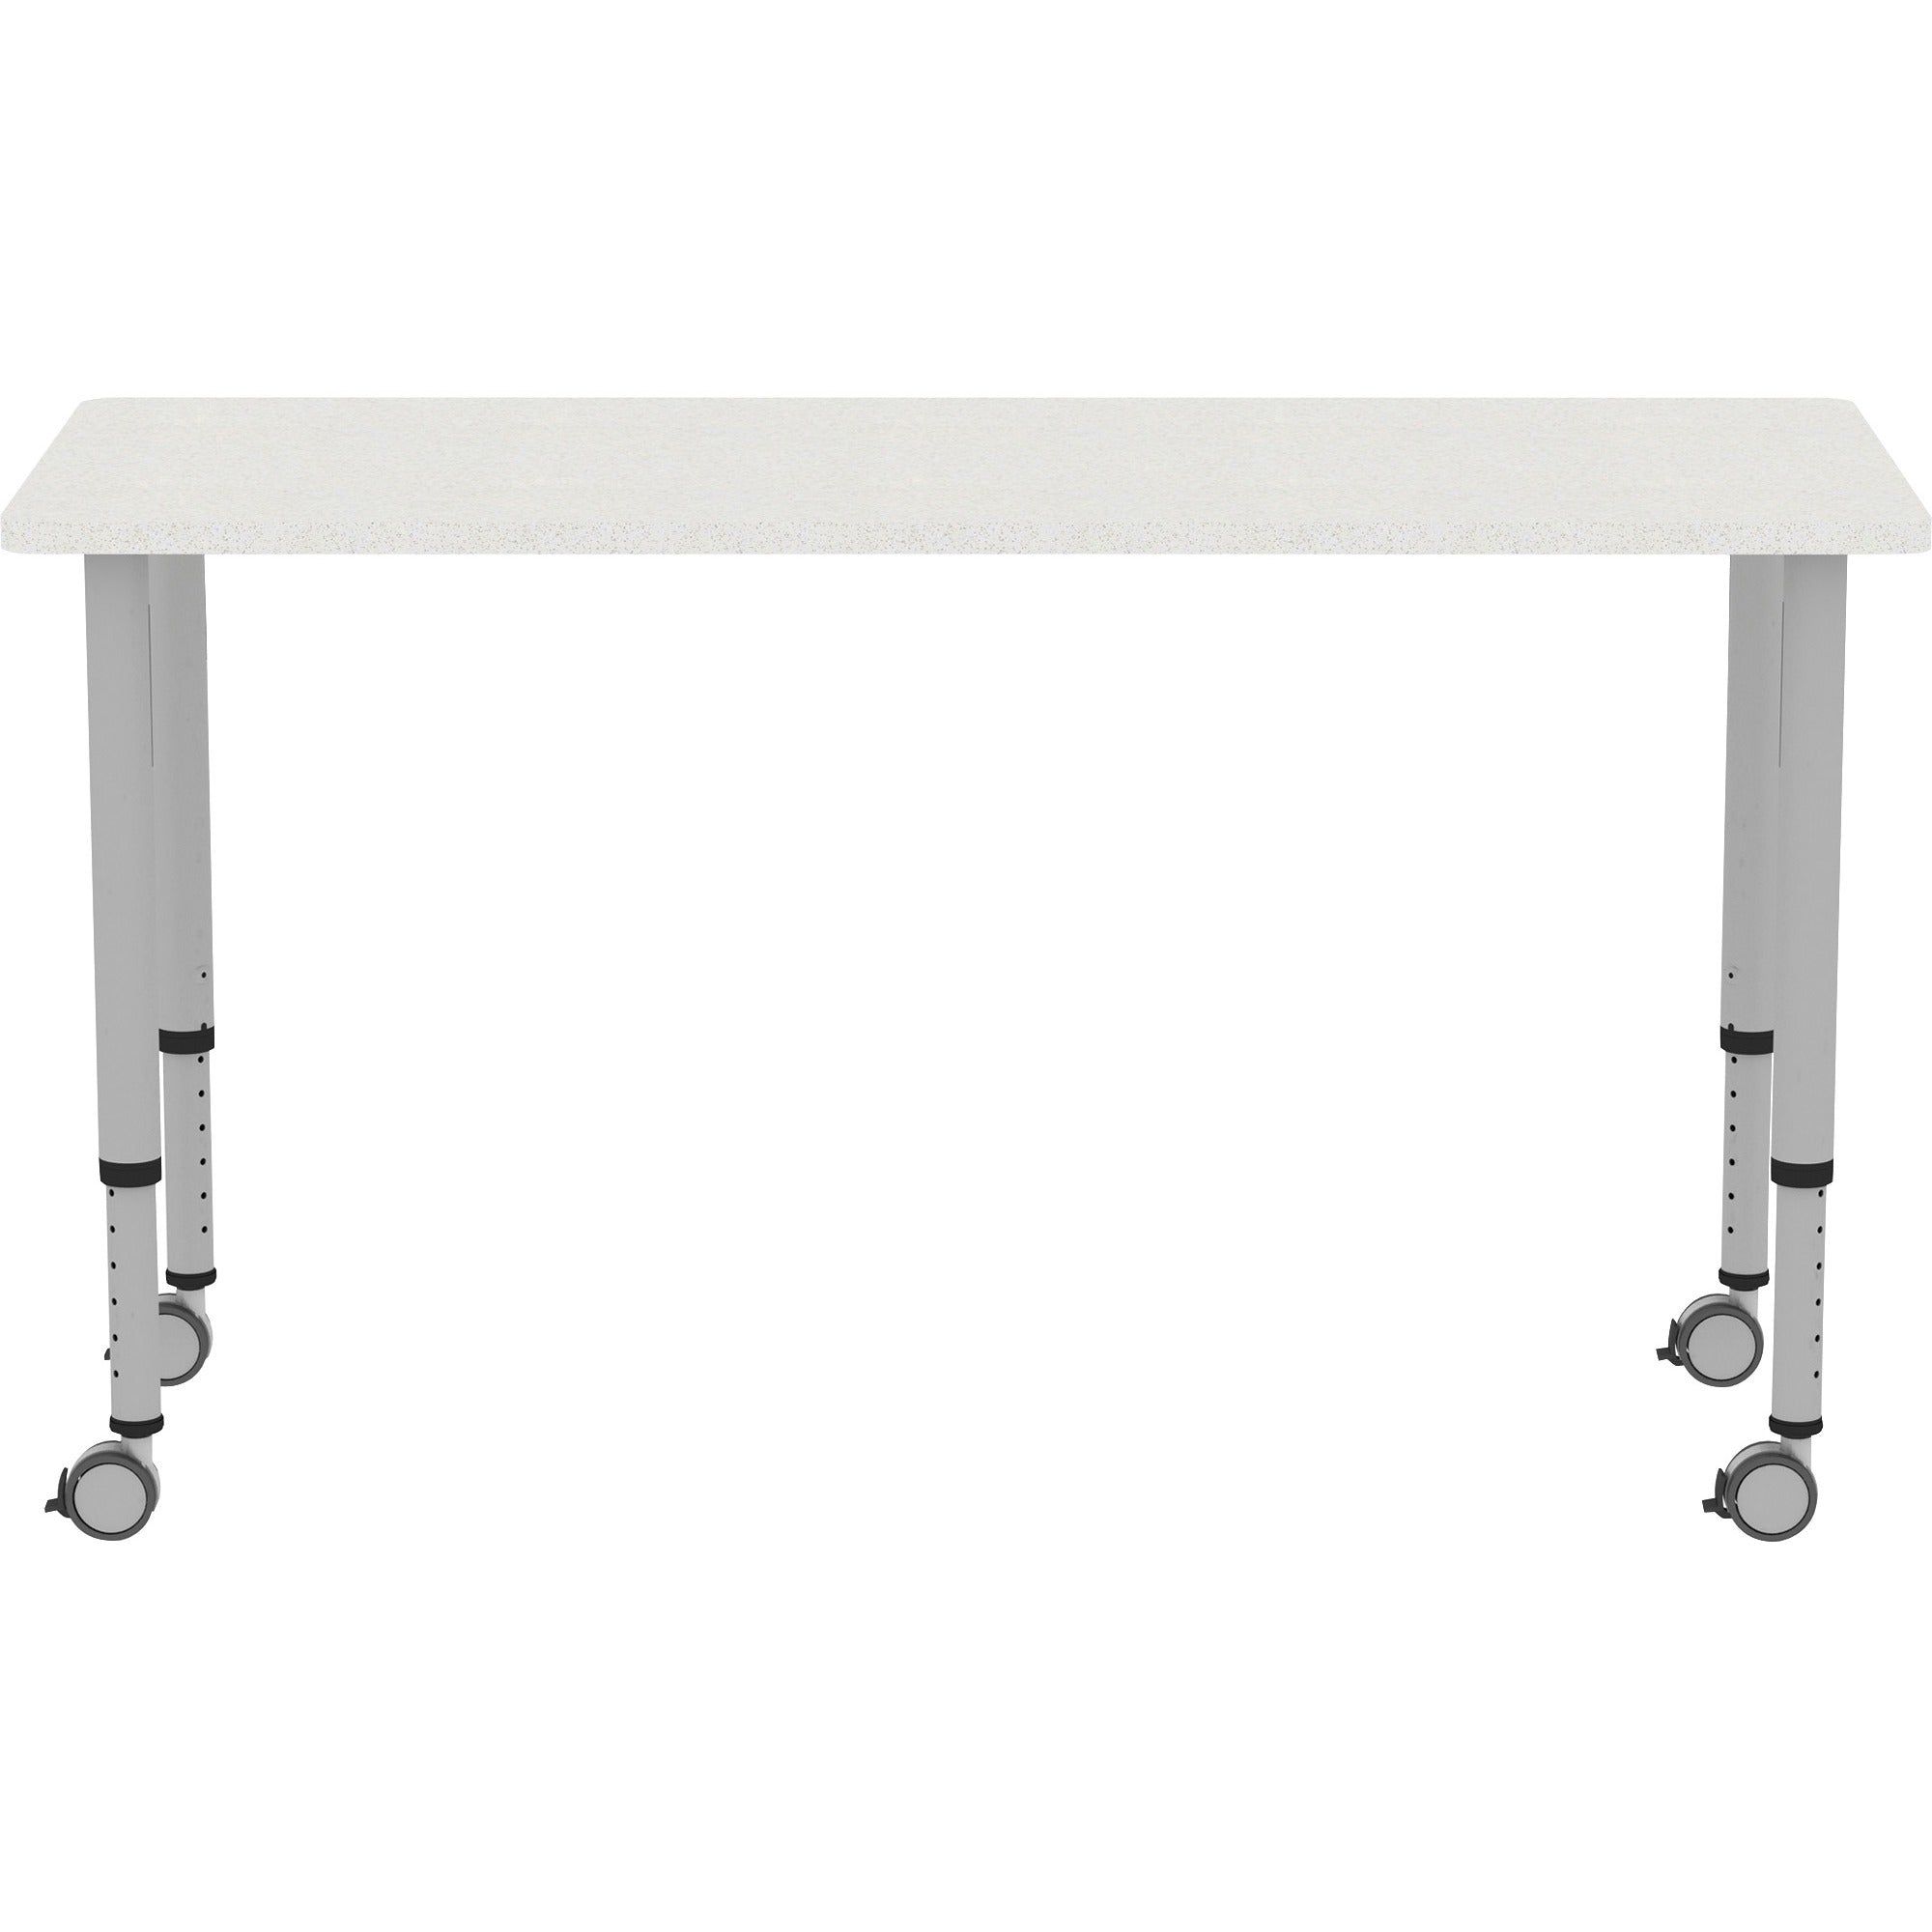 lorell-attune-height-adjustable-multipurpose-rectangular-table-for-table-toprectangle-top-adjustable-height-2662-to-3362-adjustment-x-60-table-top-width-x-2362-table-top-depth-3362-height-assembly-required-laminated-gray-lam_llr69579 - 5